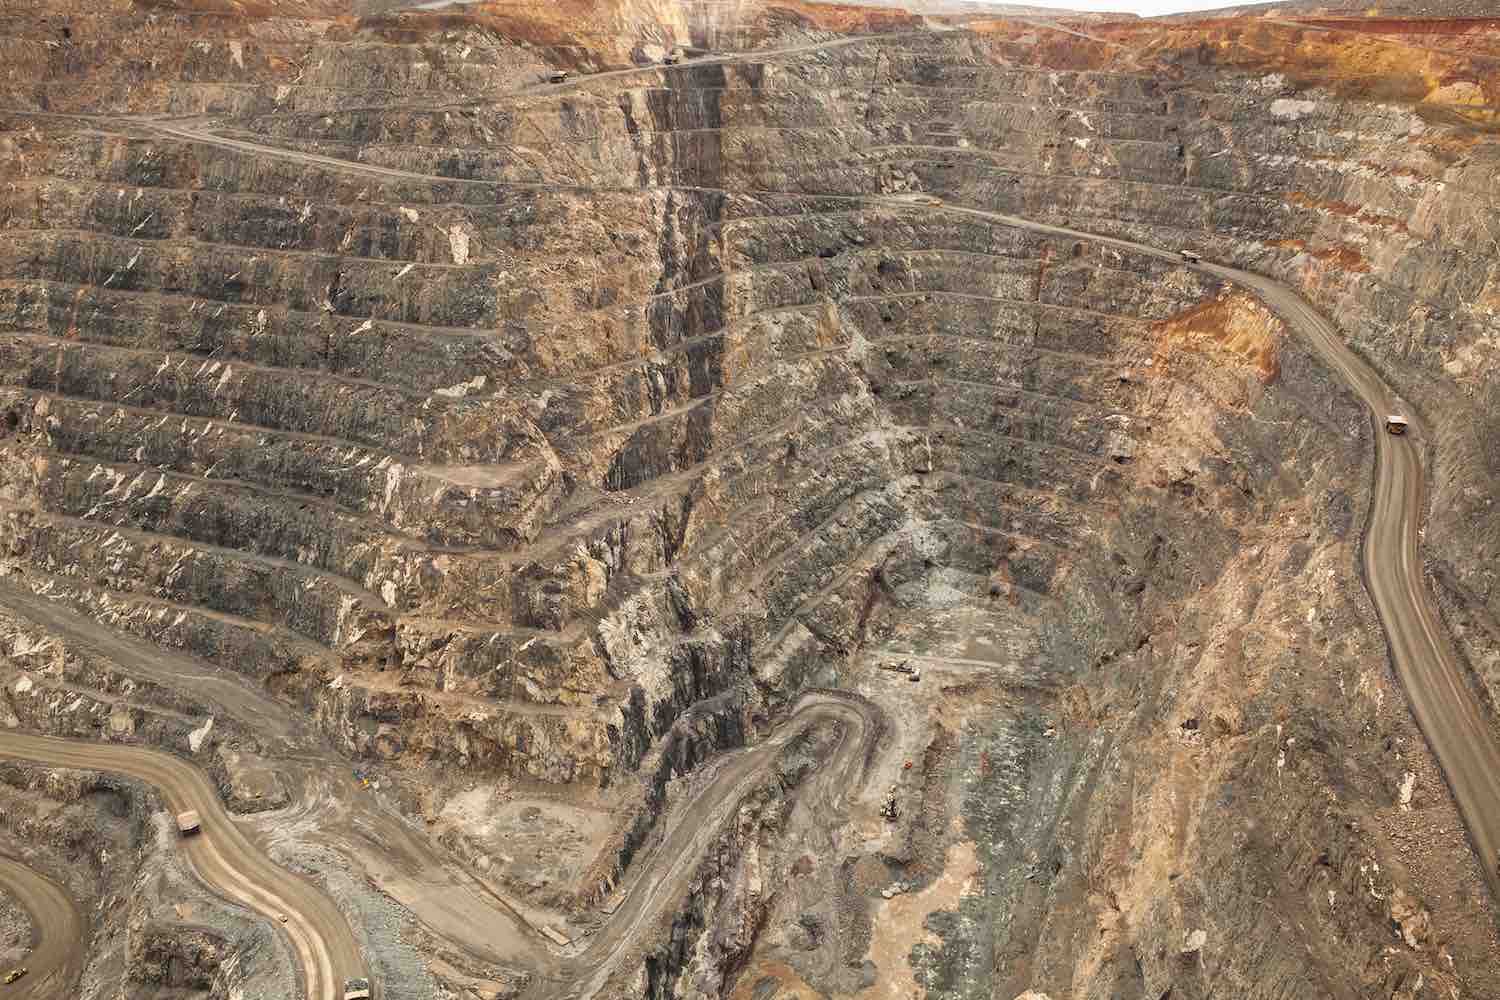 haulage-systems-for-open-pit-mines